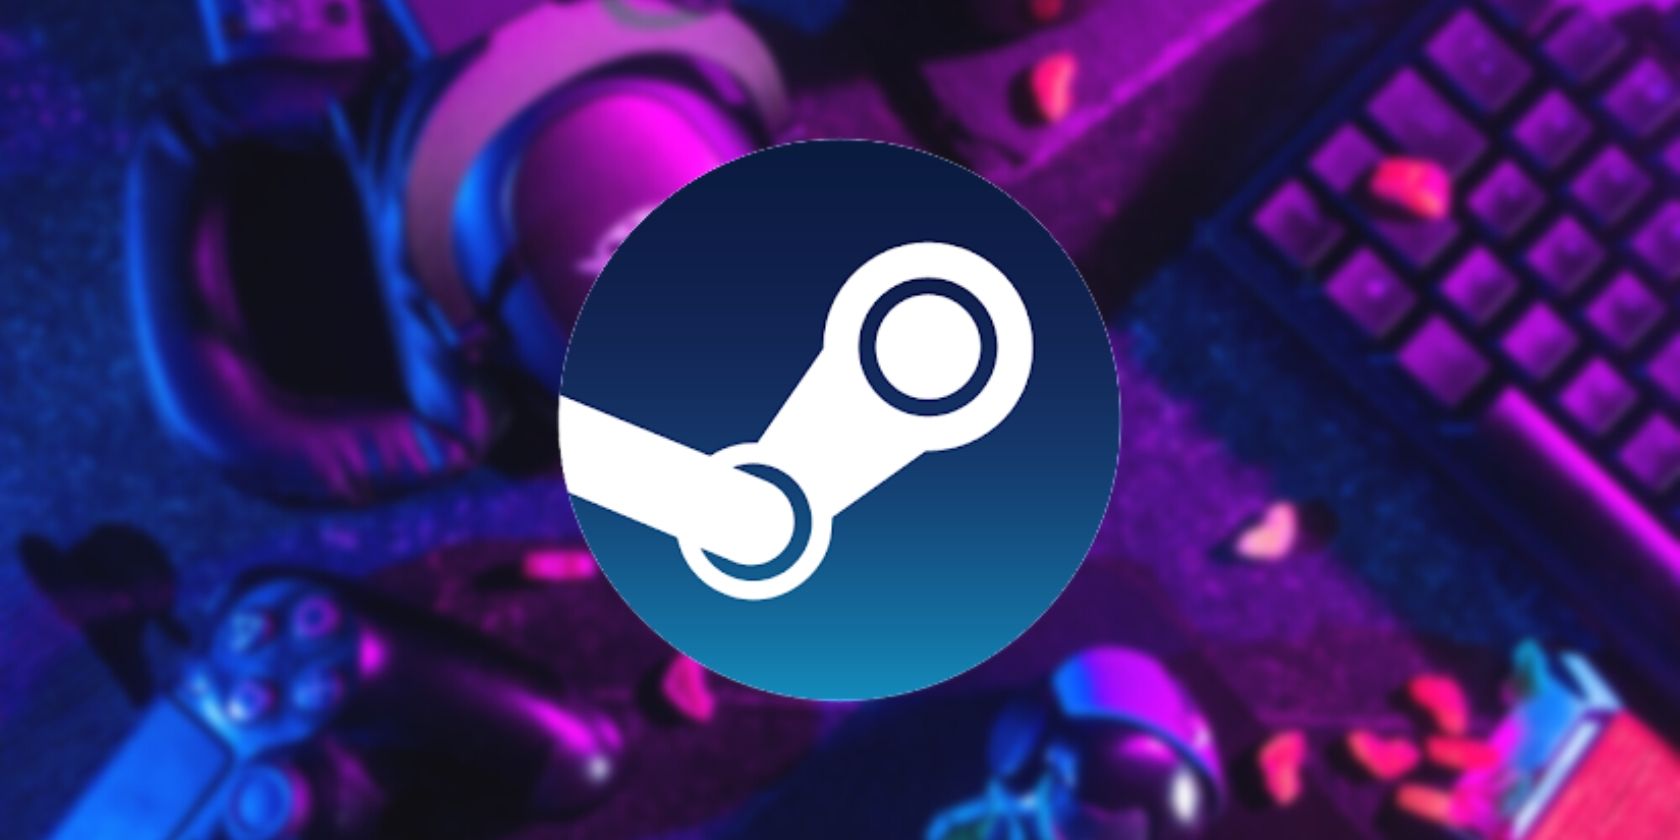 The Steam logo over a background with a gaming keyboard and headset with purple lighting 